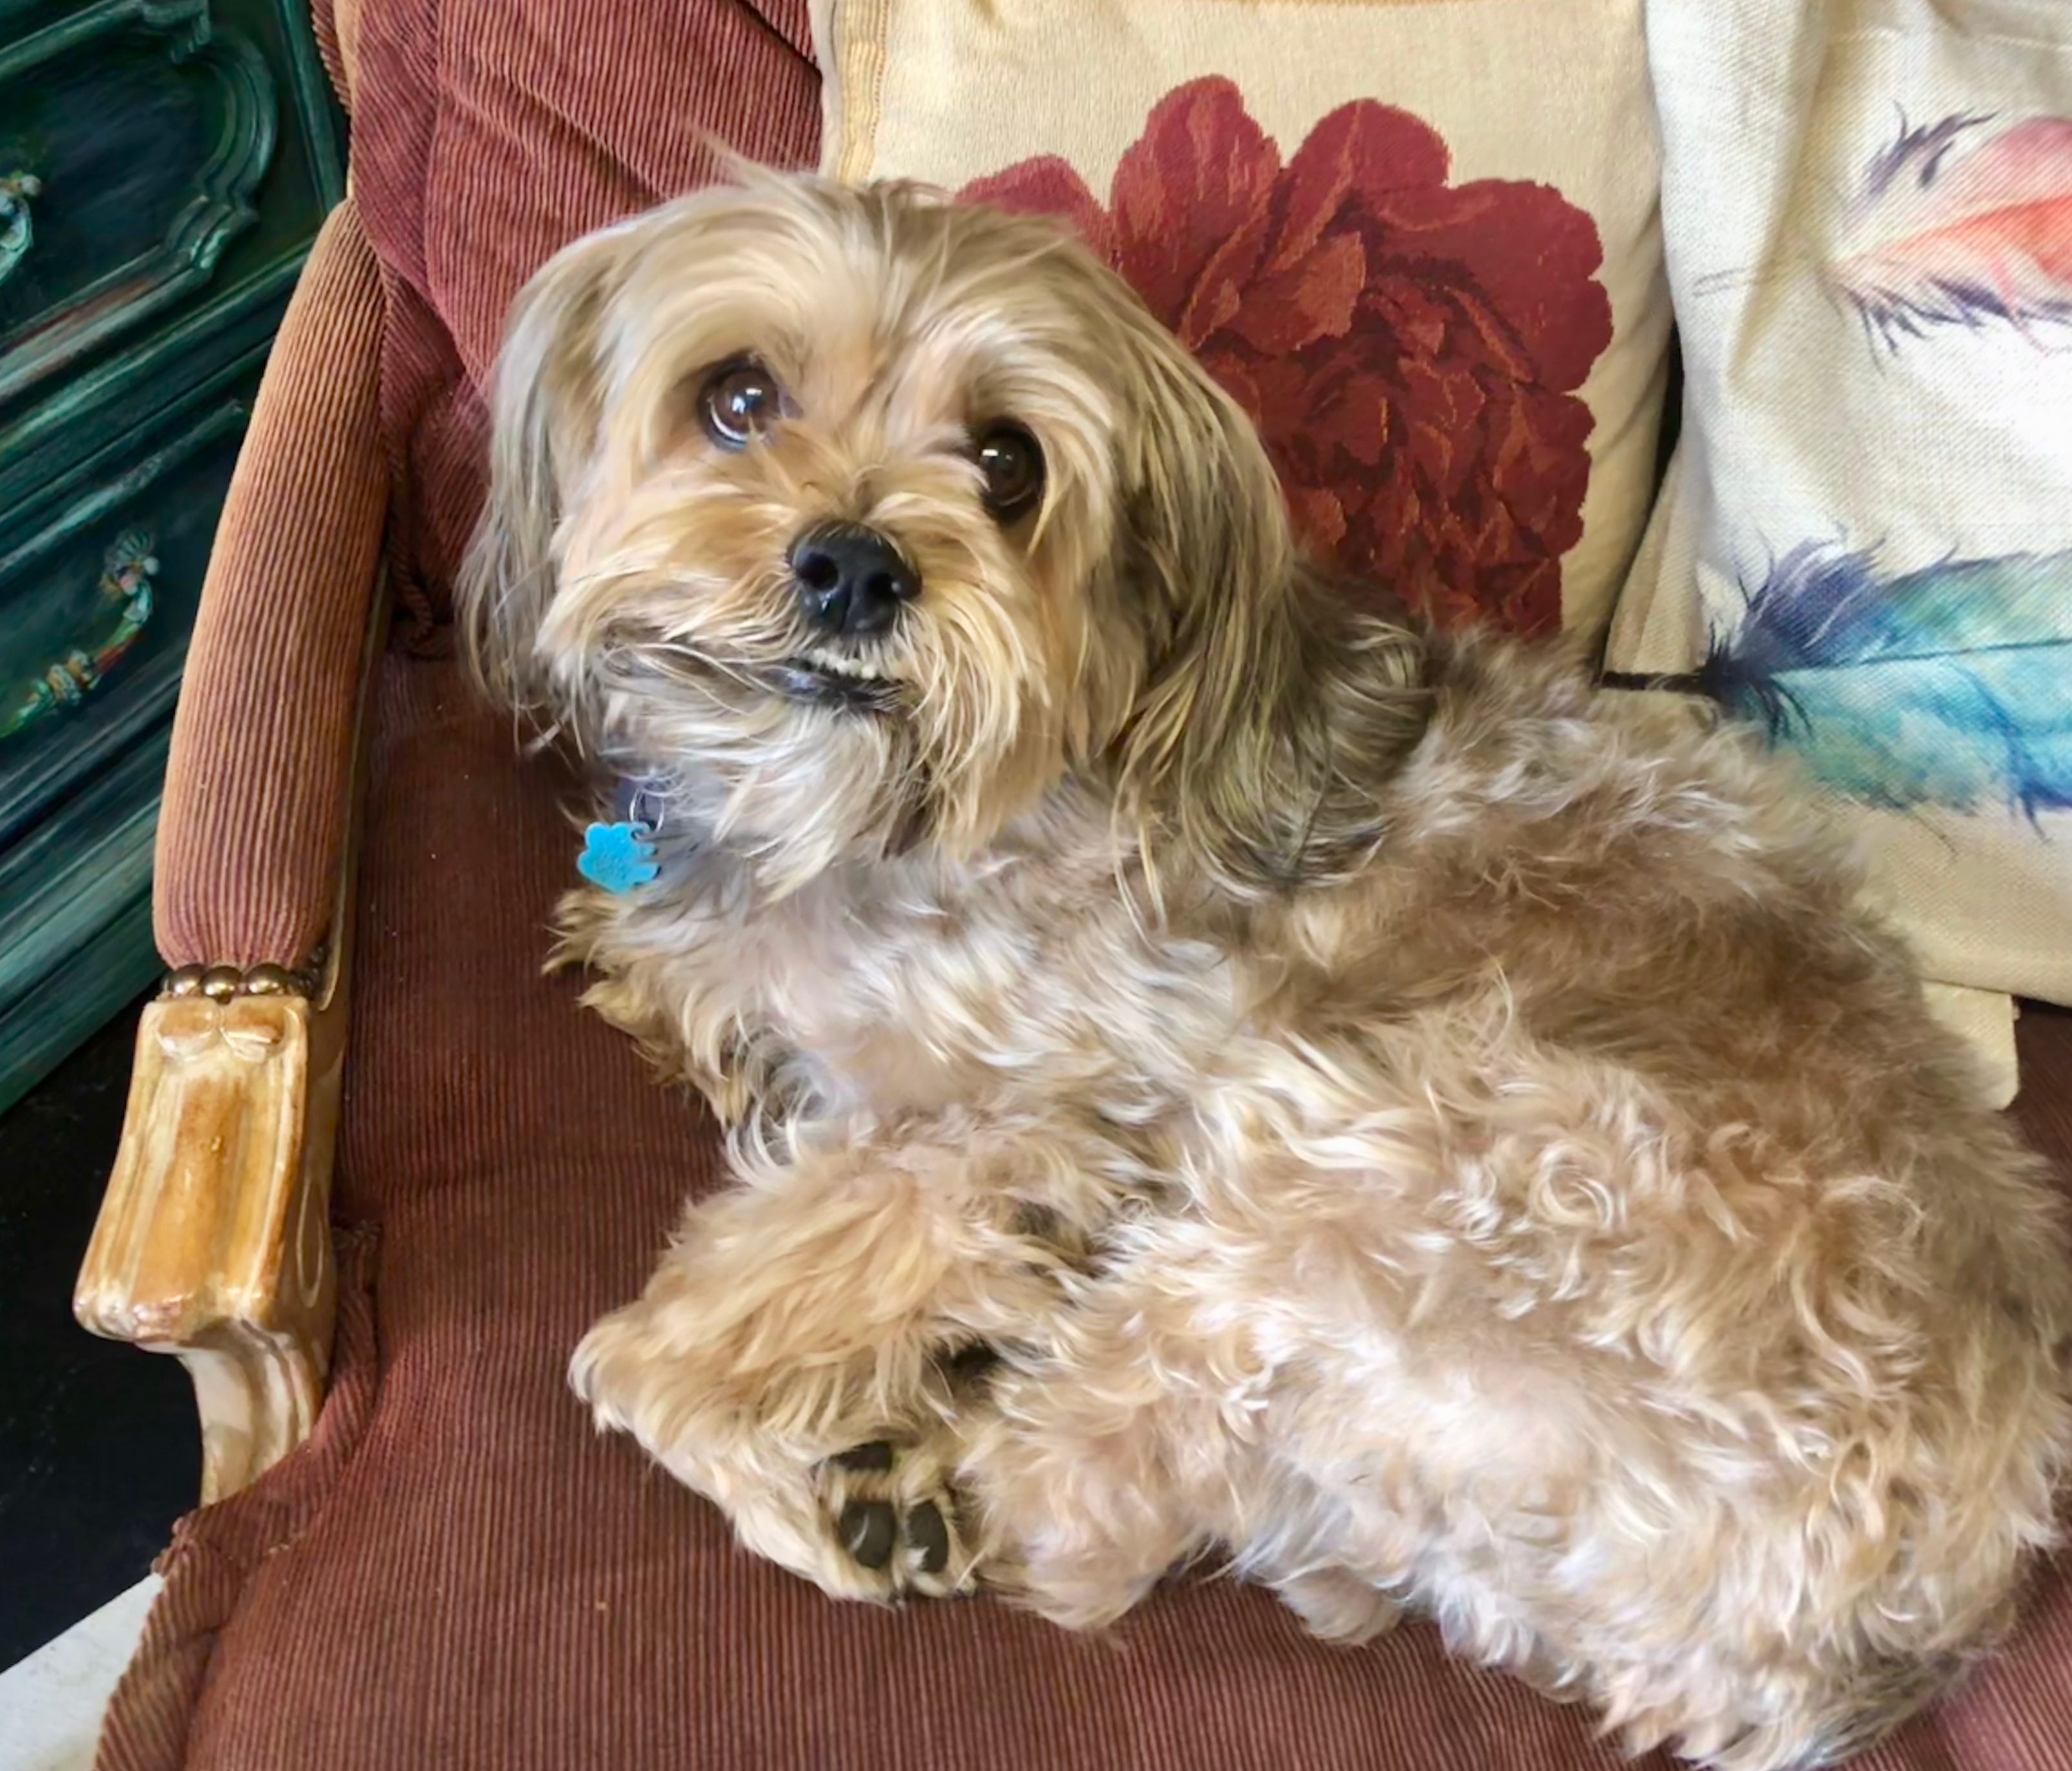 Leonardo Tufts, an 11-year-old Shorkie, is the official greeter and head of security at a Florida home decor store.